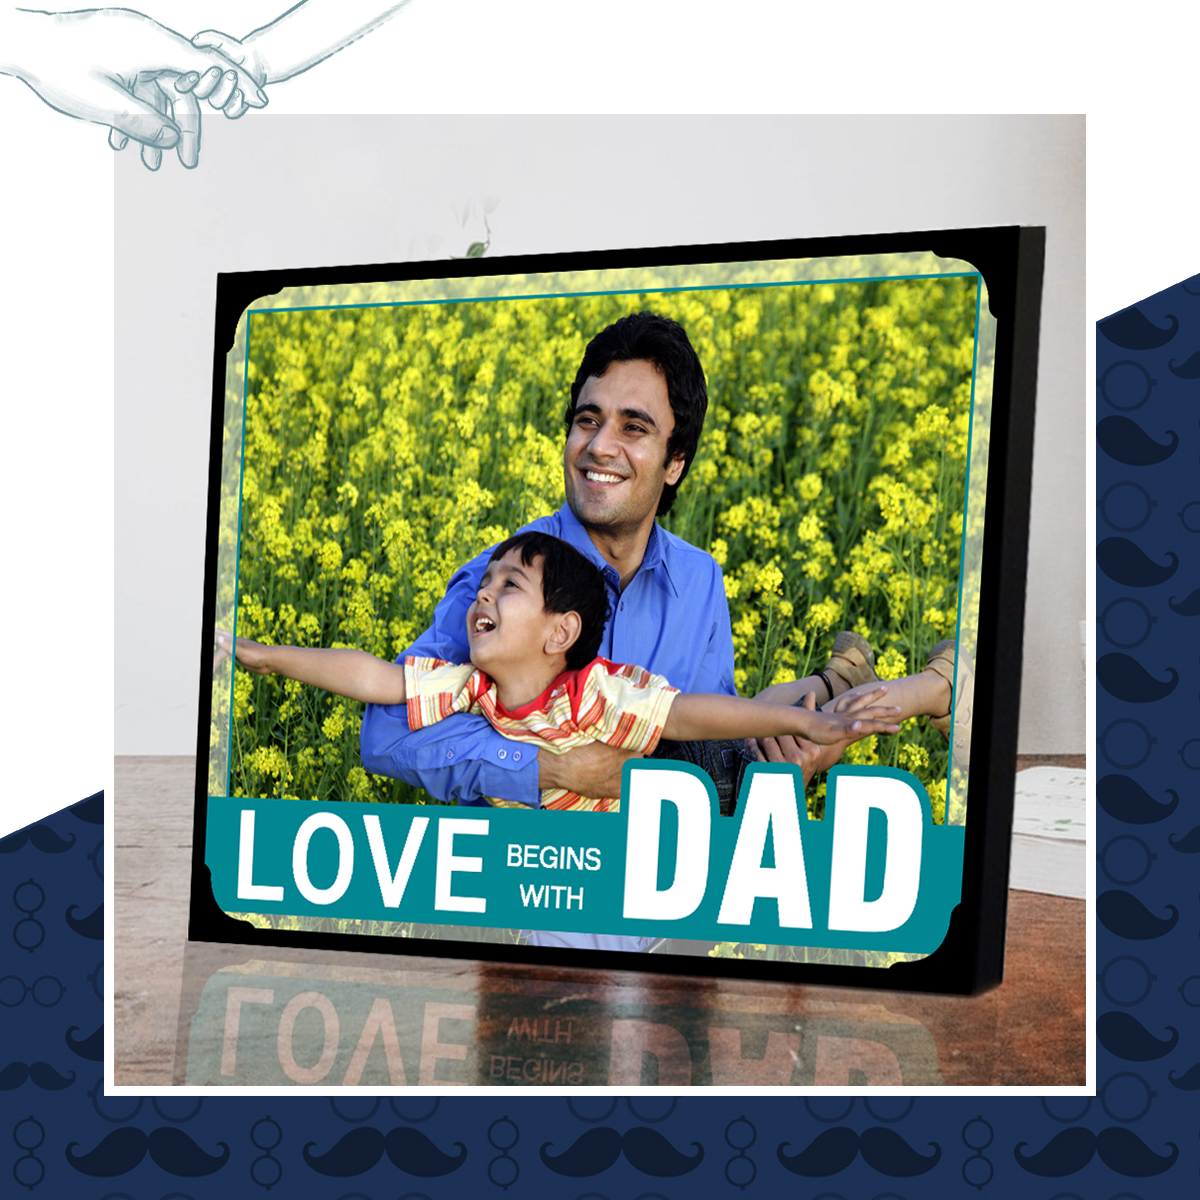 Father's Day Gifts - Best Gifts for Fathers Day Online India 2022 | Cadbury  Gifting India